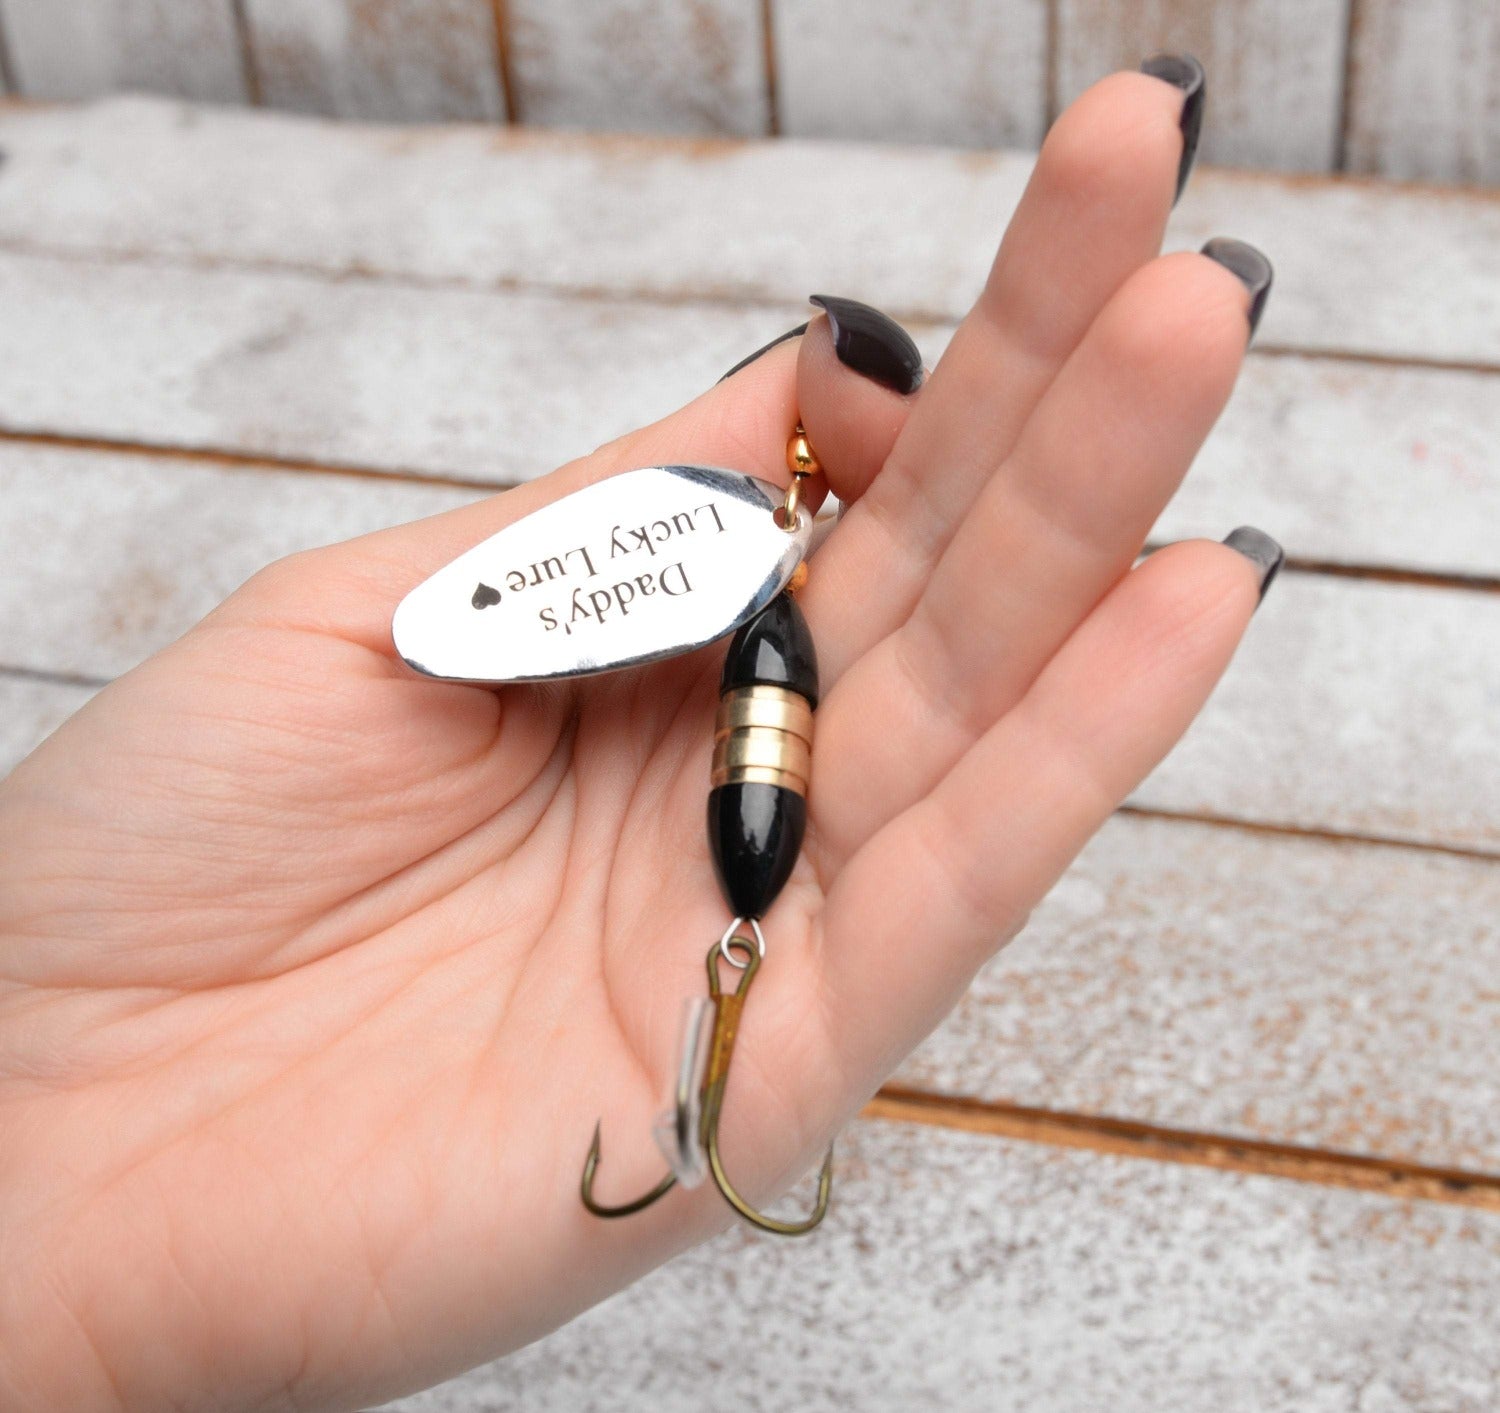 Personalized Fishing gift Lure Personalized Fishing gift Lure  Fishing gift for man Personalized lure in gift box bait for fisherman Daddy Grandpa Brother godfather Christmas gift thanksgiving day Birthday gift for him retired gift 